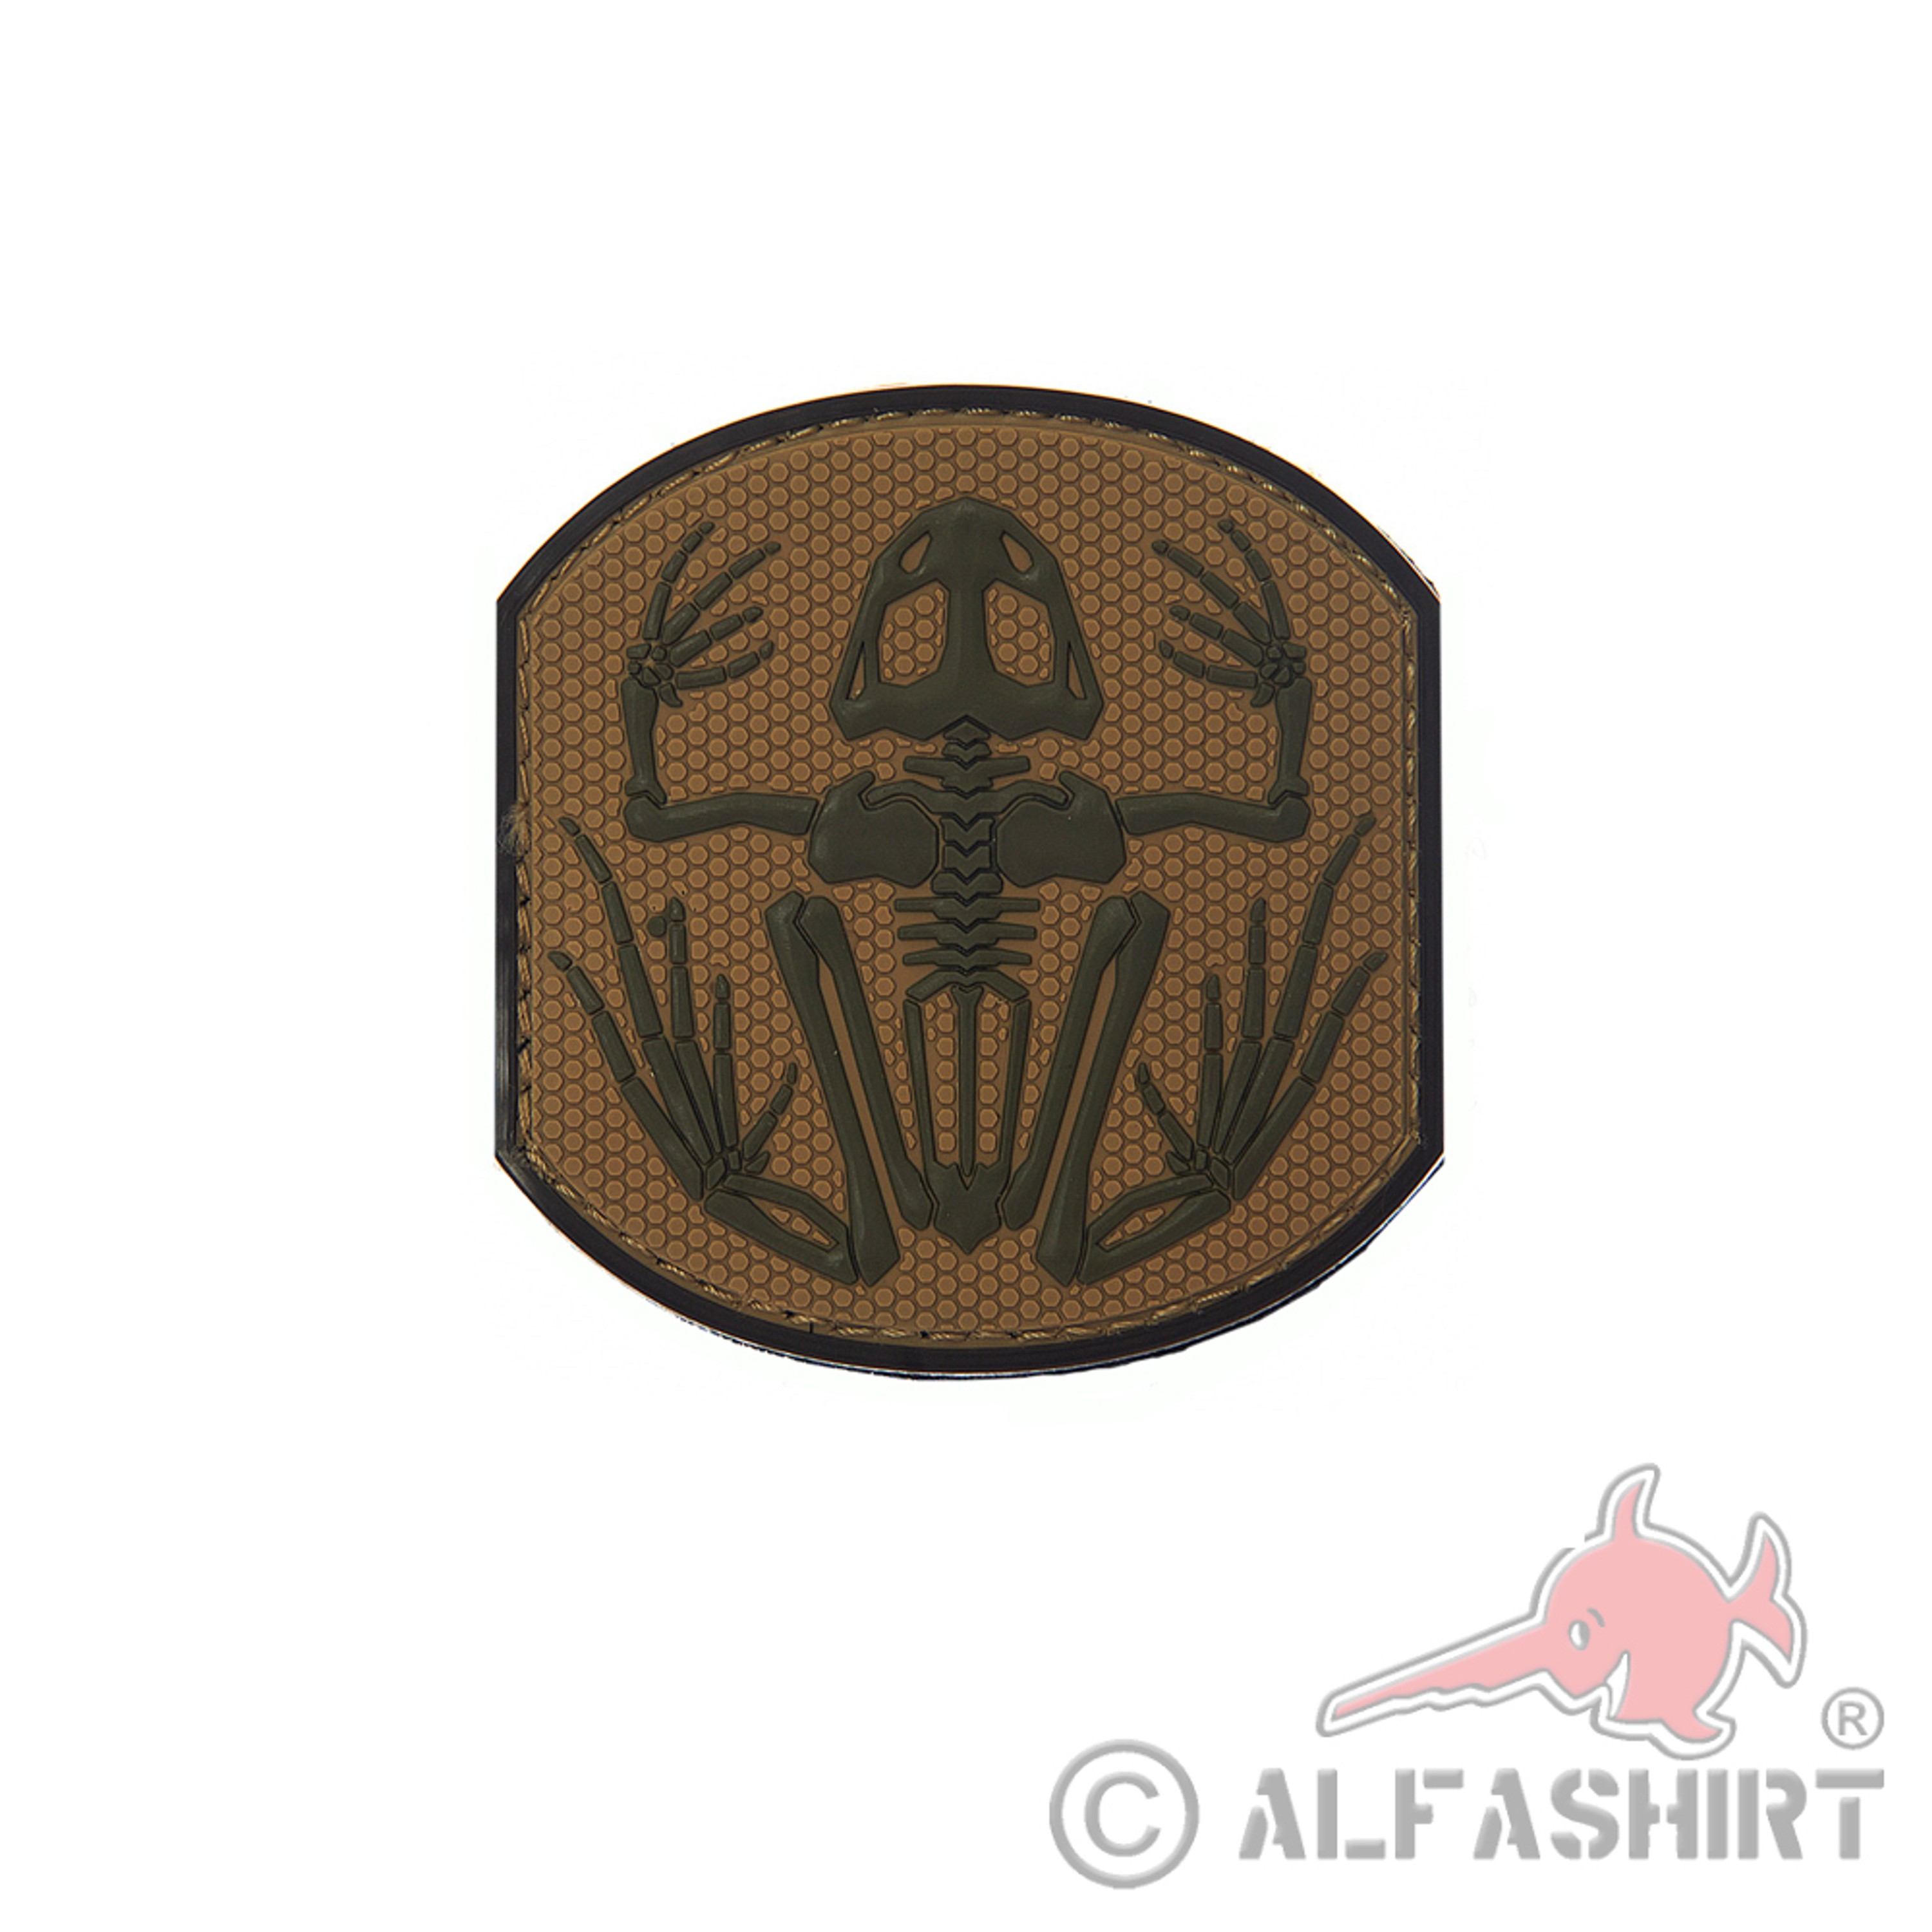 Patch Aufnäher Navy Seal Airsoft Gotcha Morale Frog Abzeichen Tactical PVC 